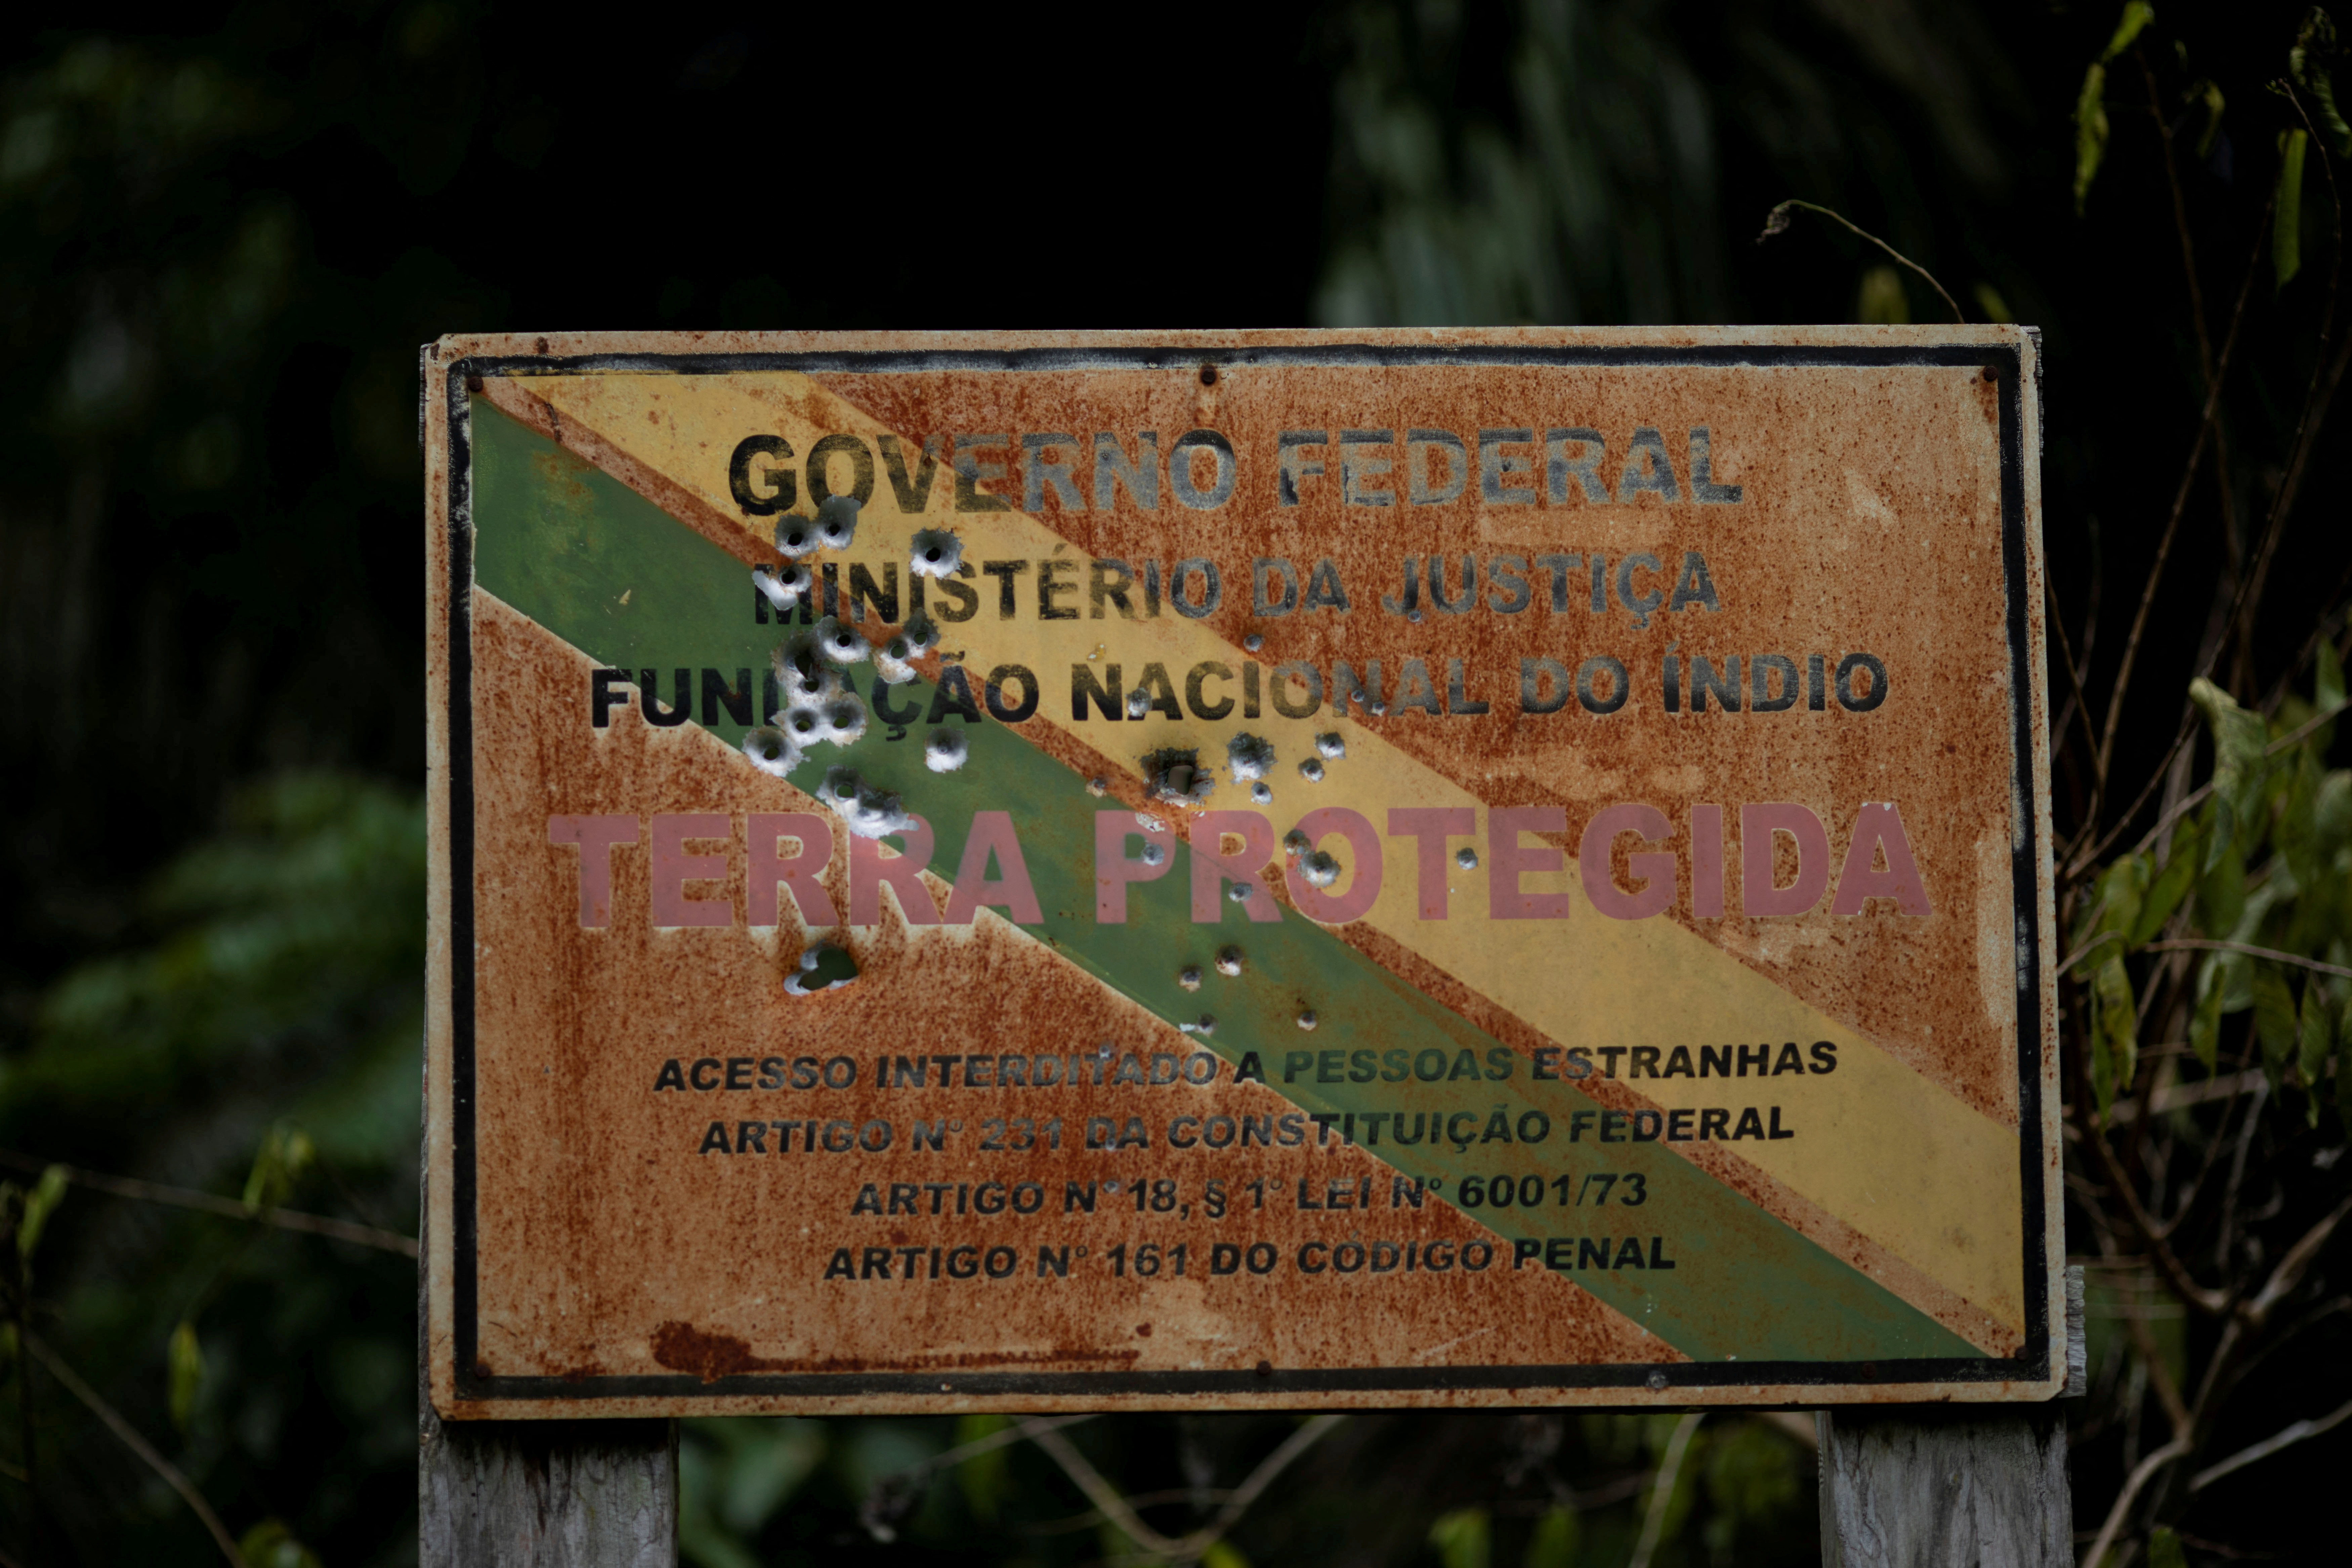 Shot marks are seen on an official Funai sign, which warns of the limits of the Uru-eu-wau-wau Indigenous Reservation near Campo Novo de Rondonia